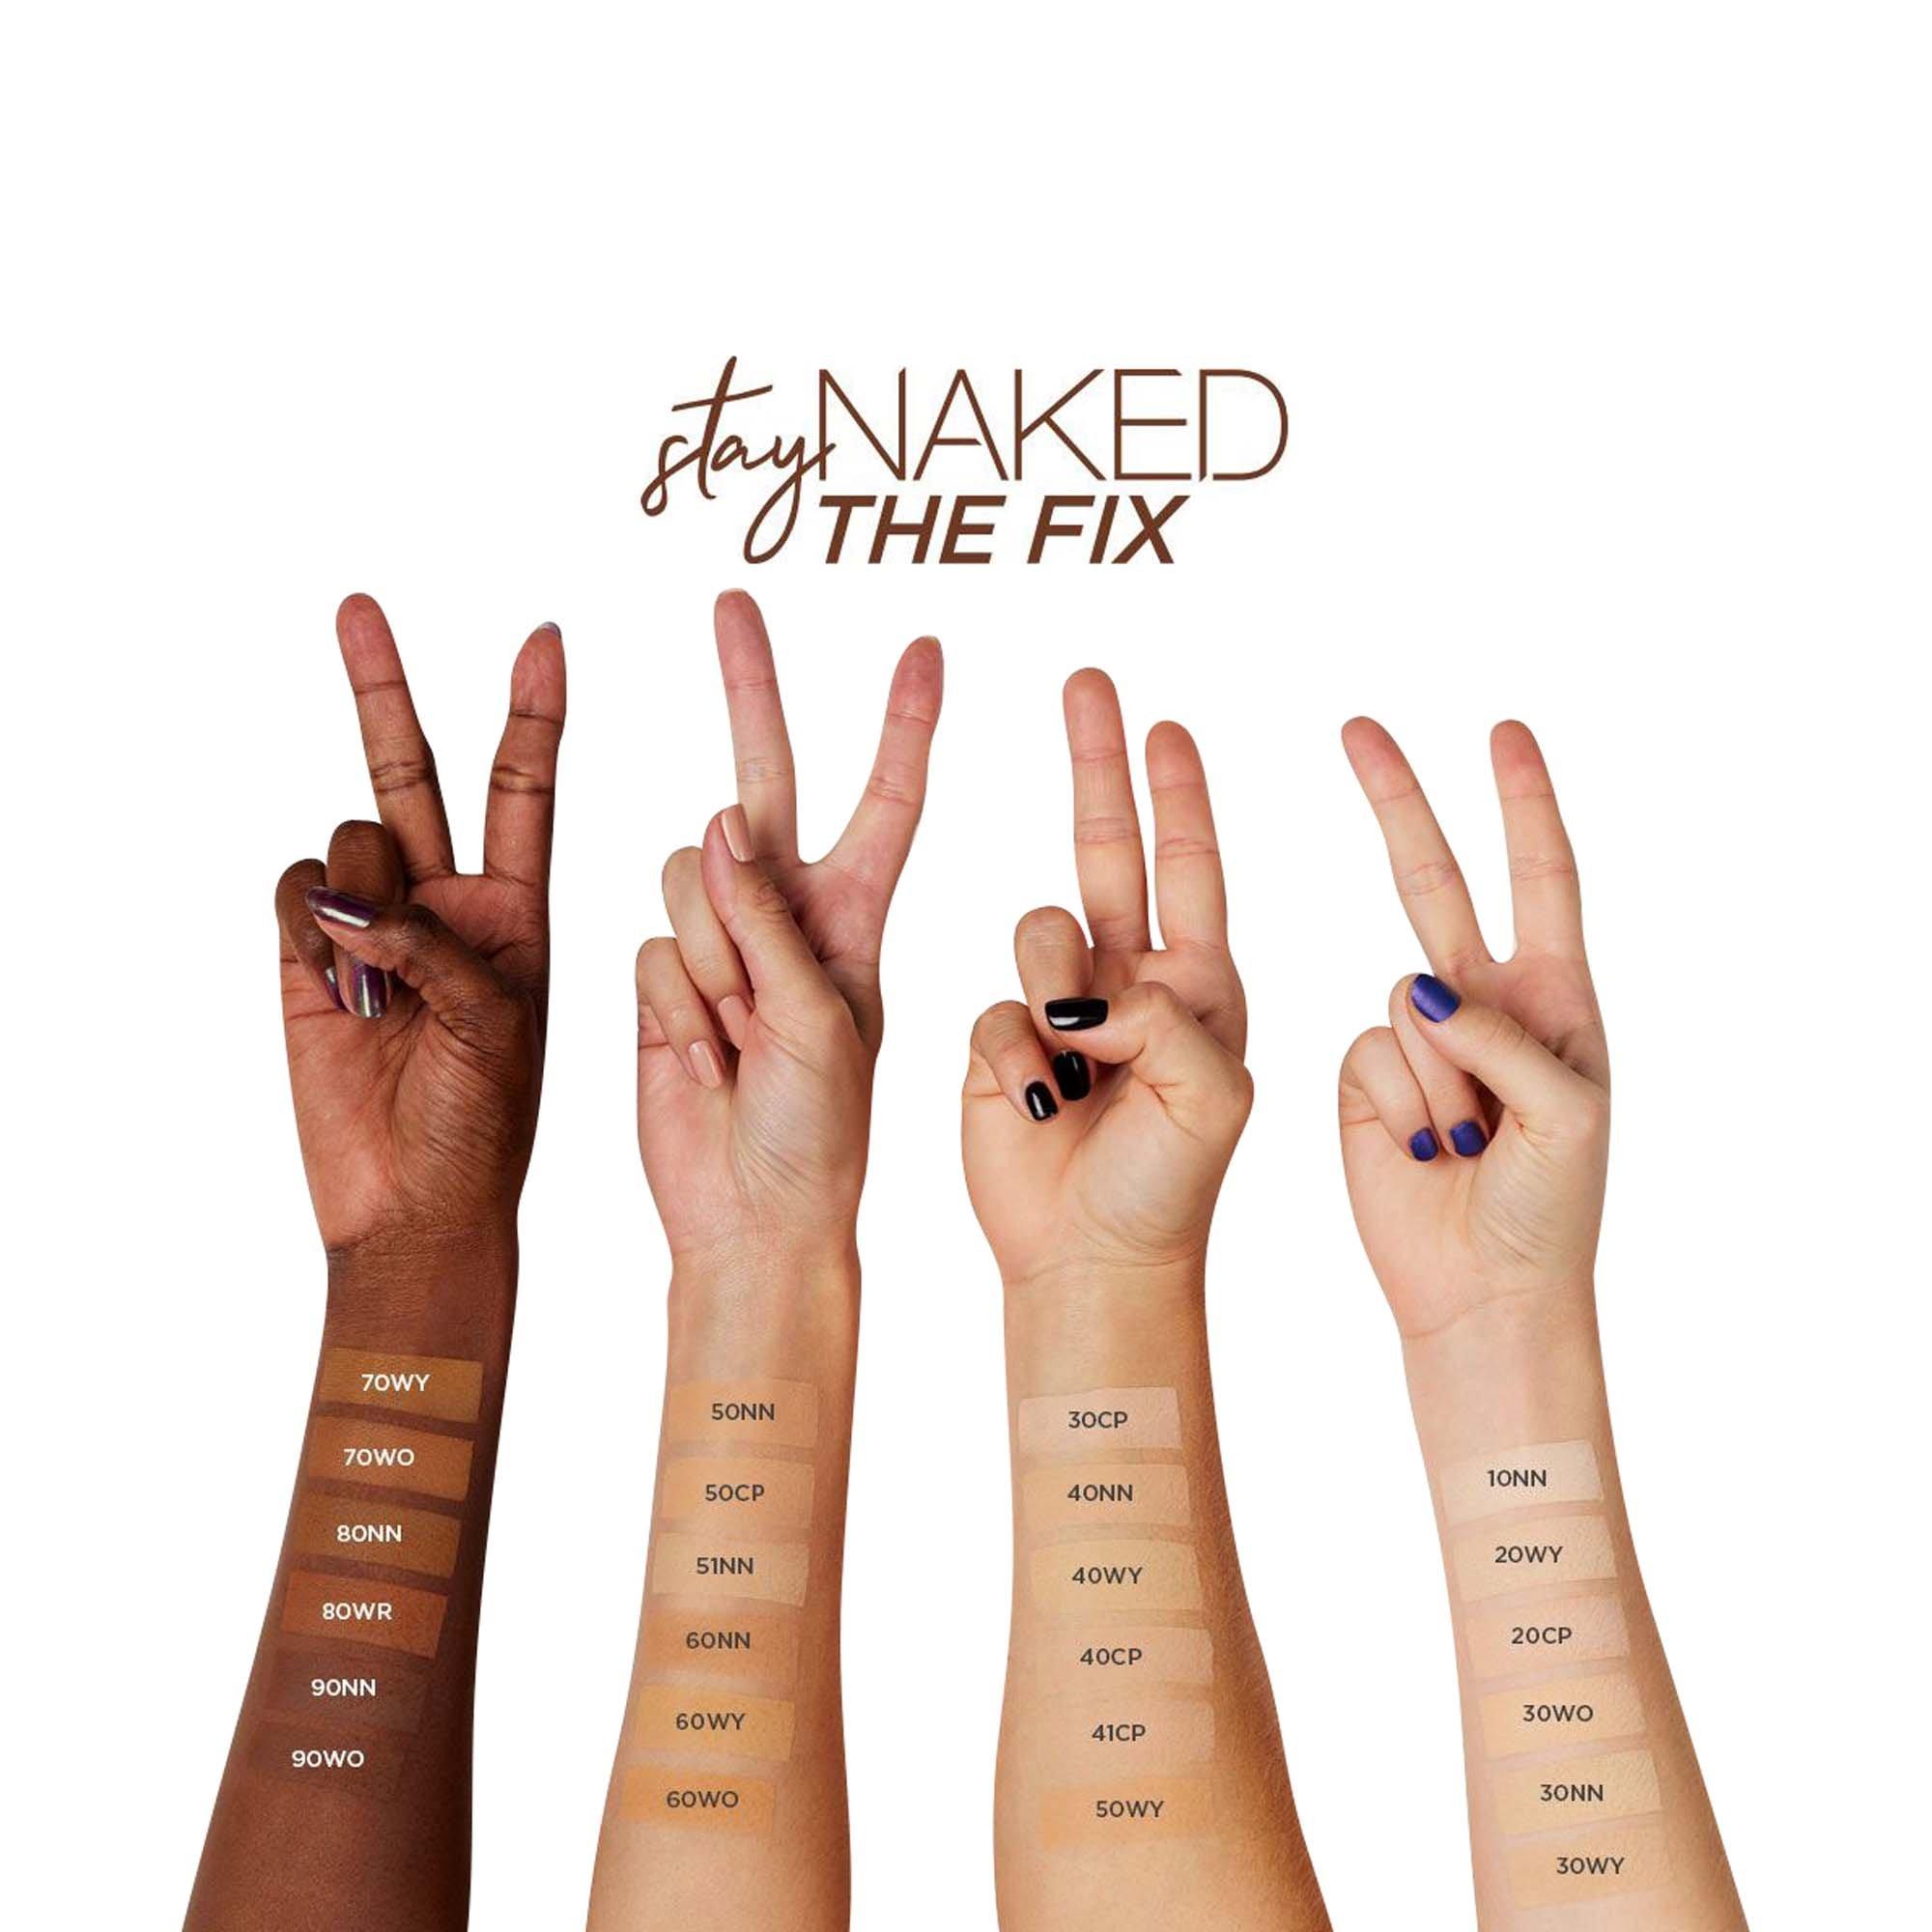 URBAN DECAY  UDStay Naked The Fix 